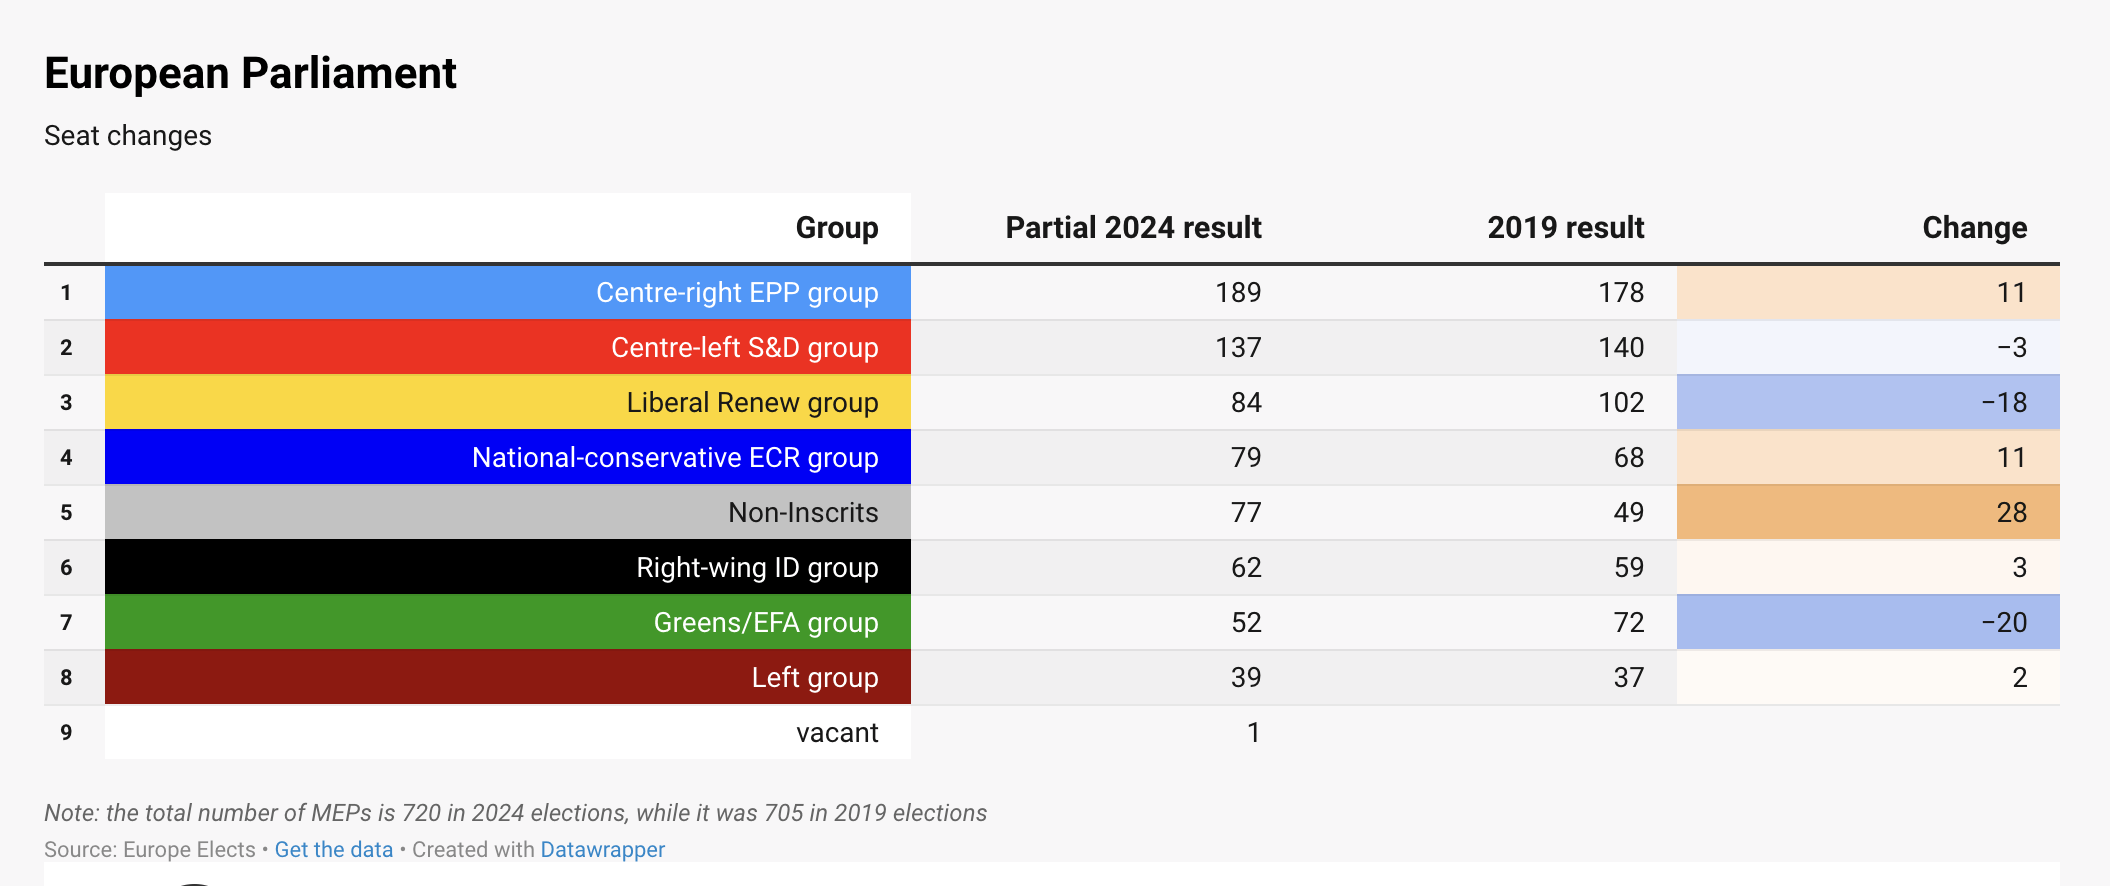 Elections results